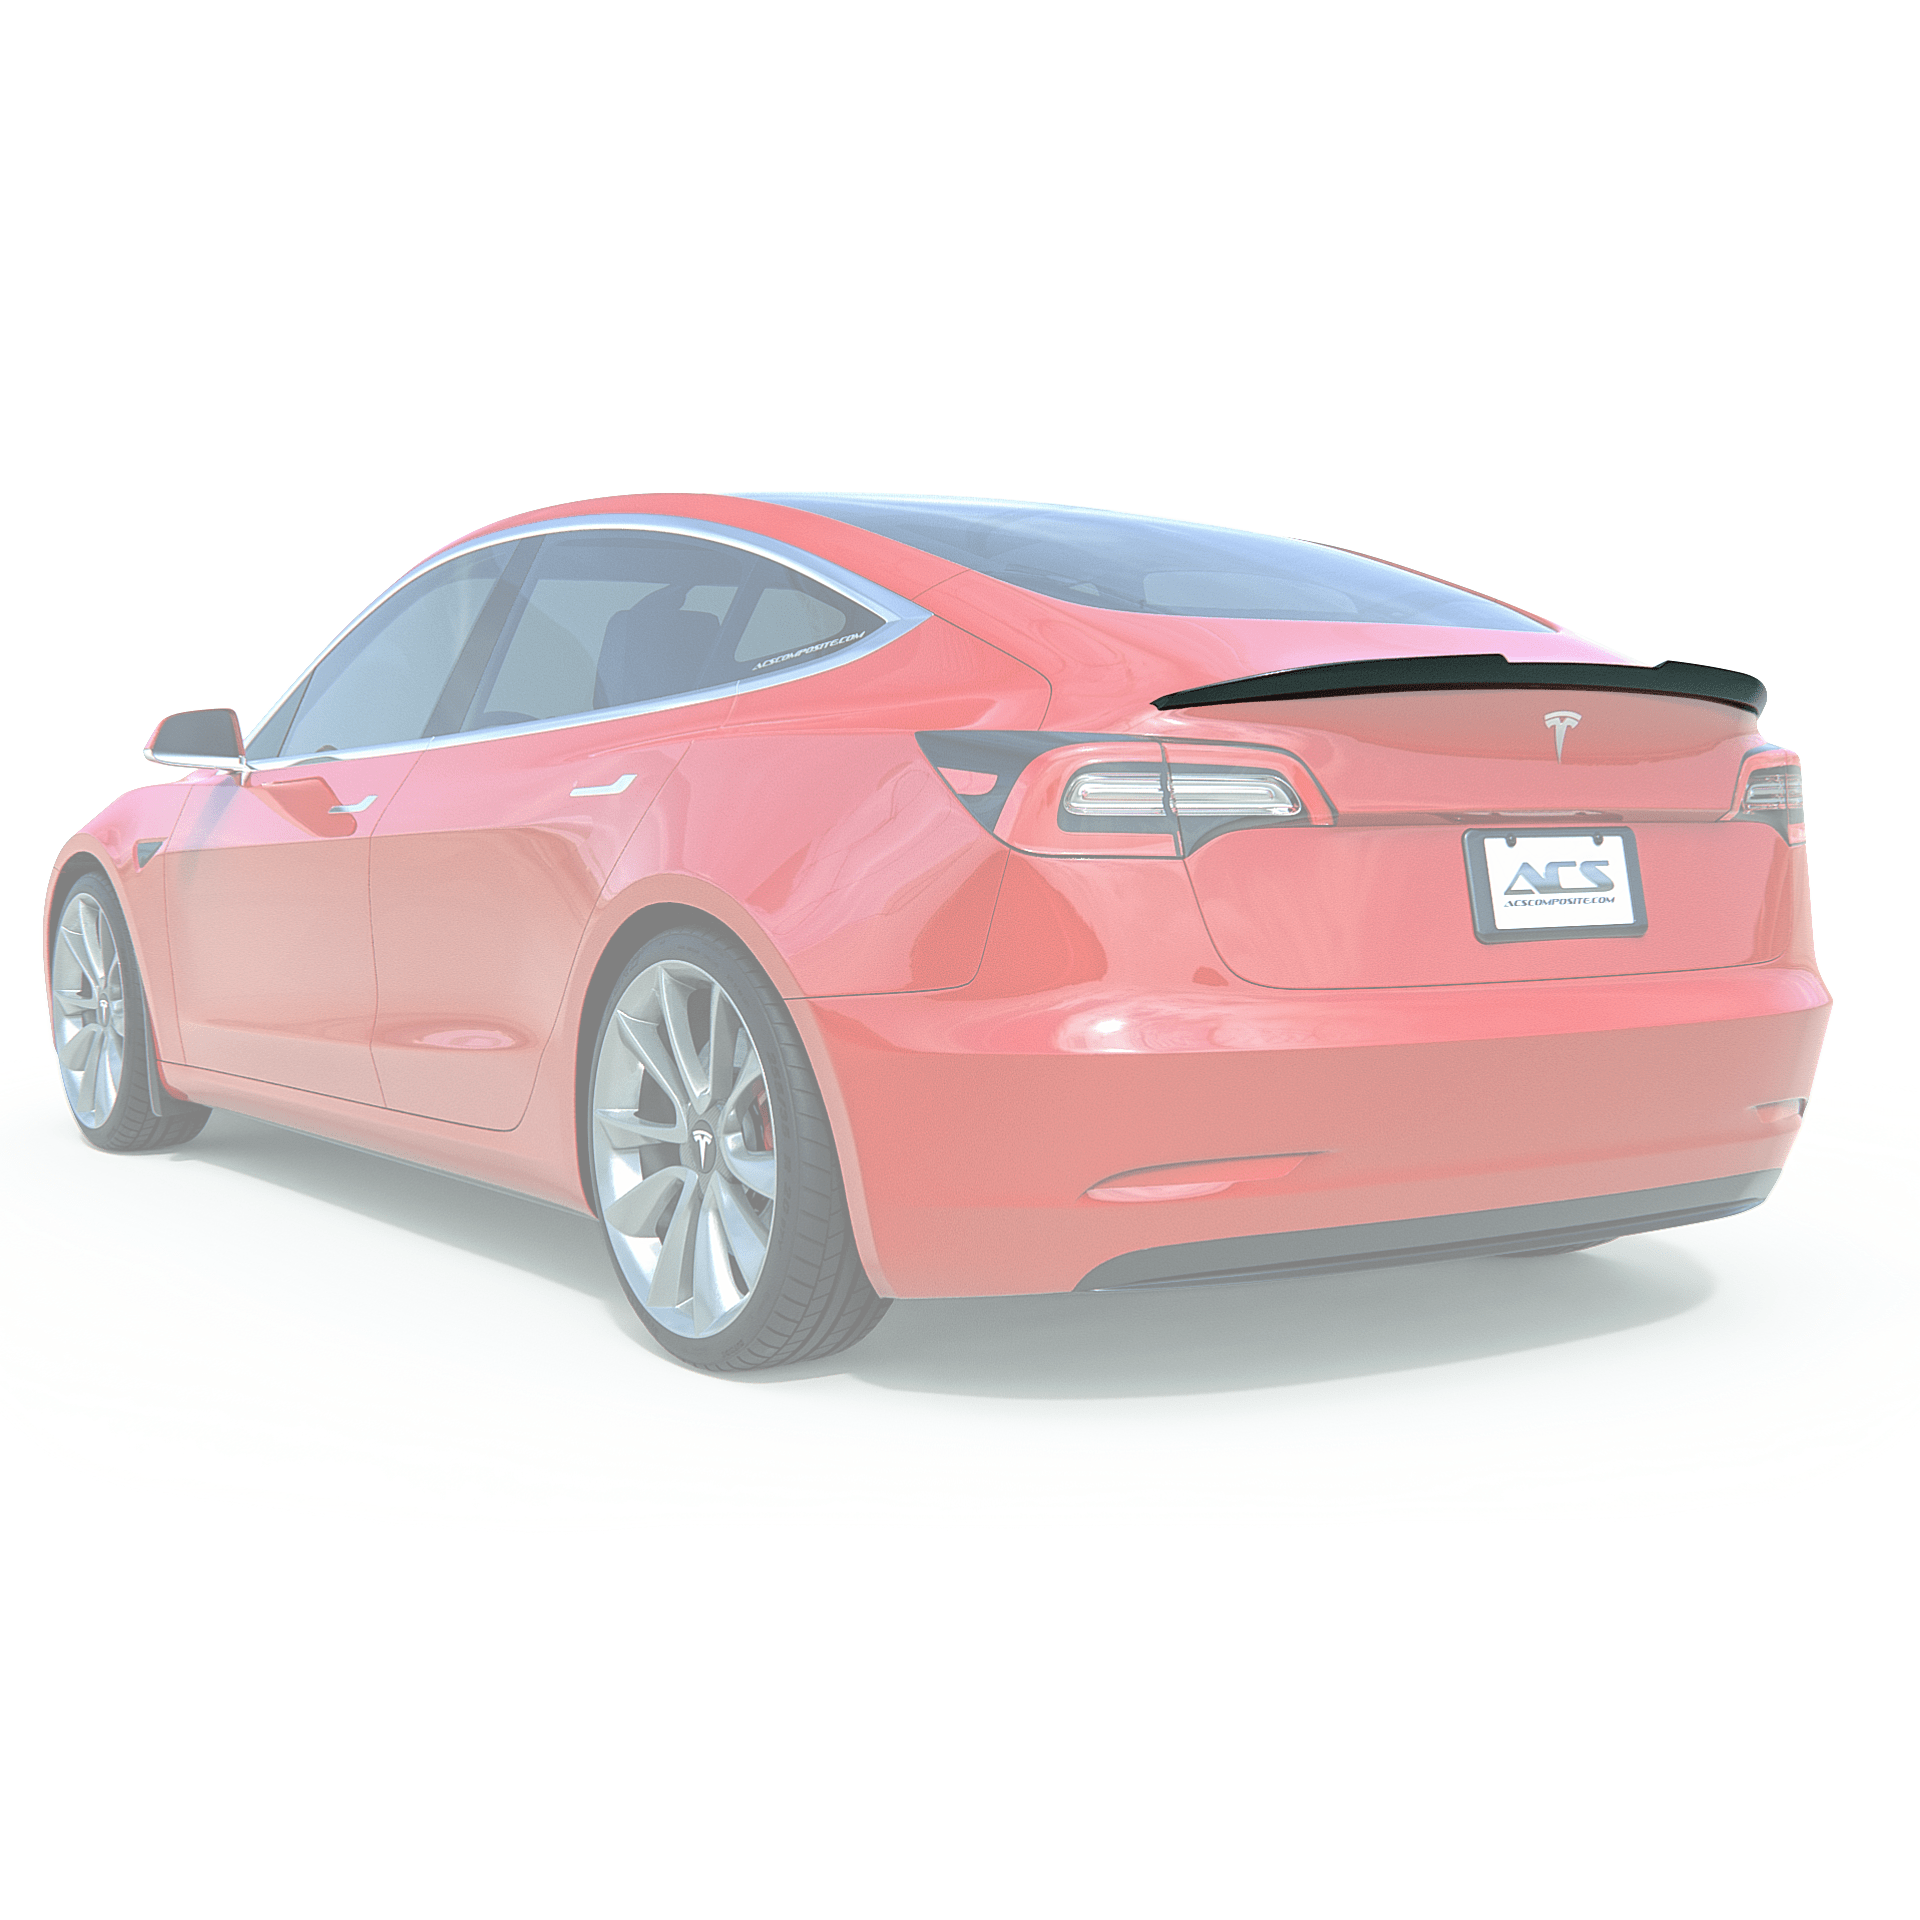 ACS Composite Tesla Model 3 Spoiler in Gloss Black finish, SKU 51-4-001, adds sporty look with downforce wickers, easy installation with pre-applied adhesive and templates.